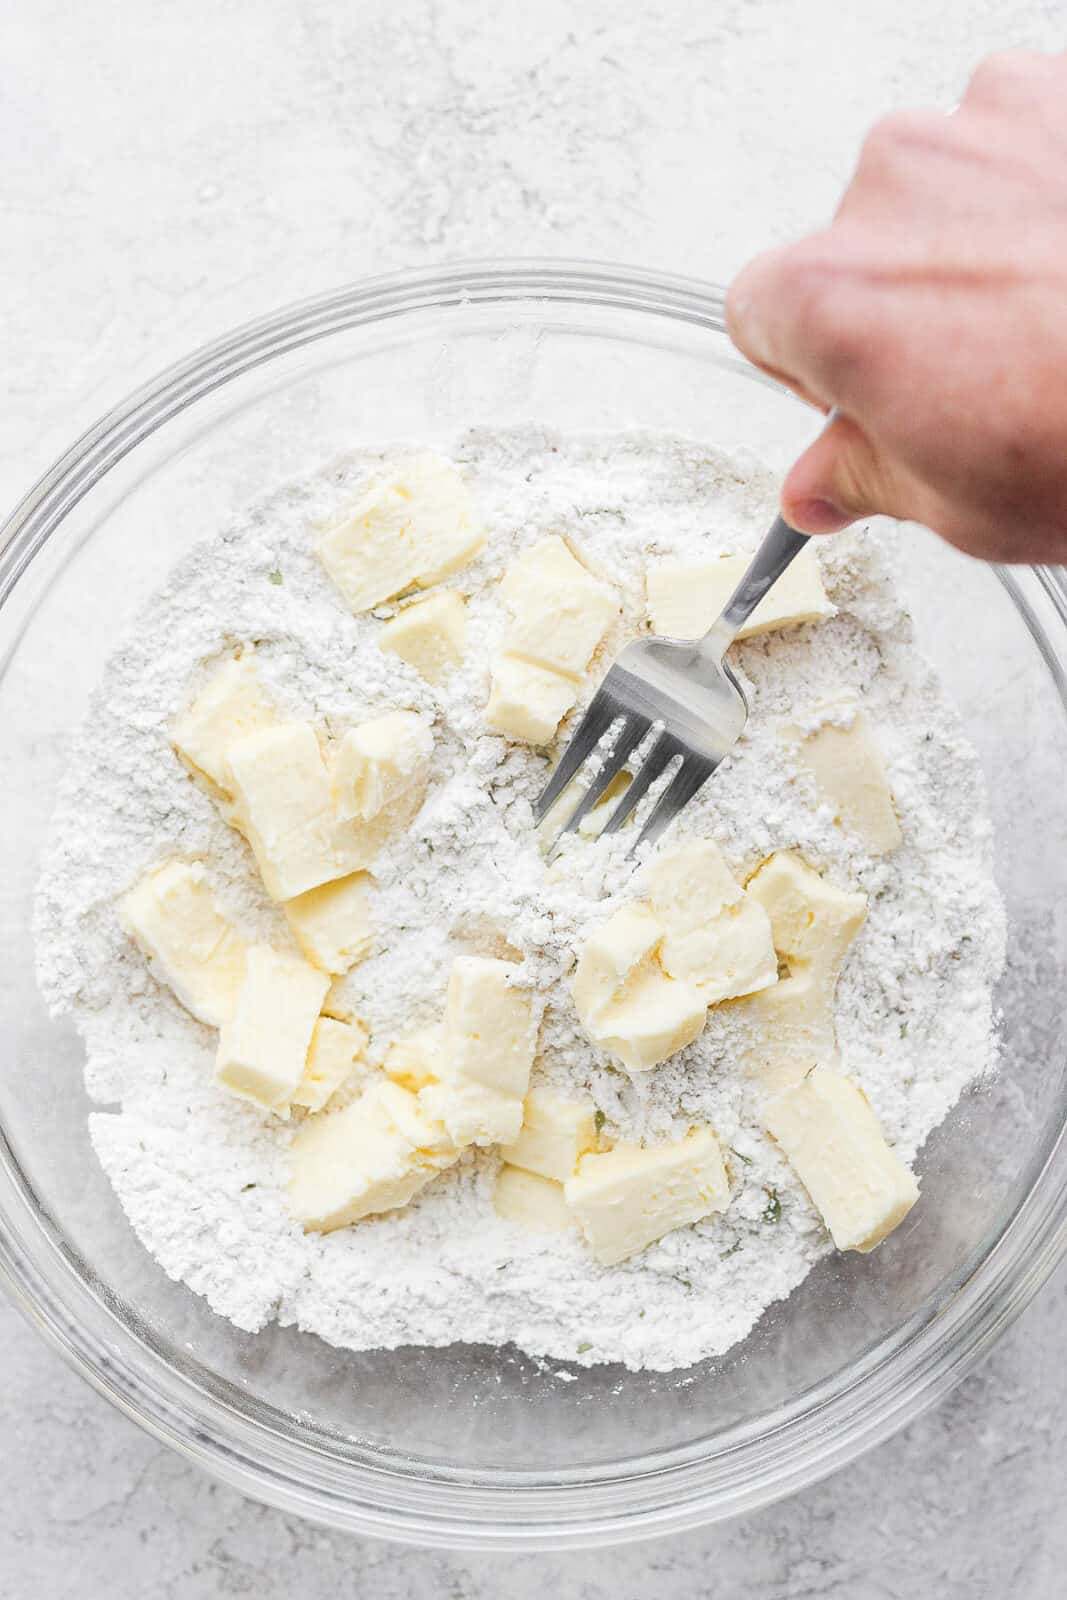 A fork mixing butter into the dry ingredients for gluten free biscuits.